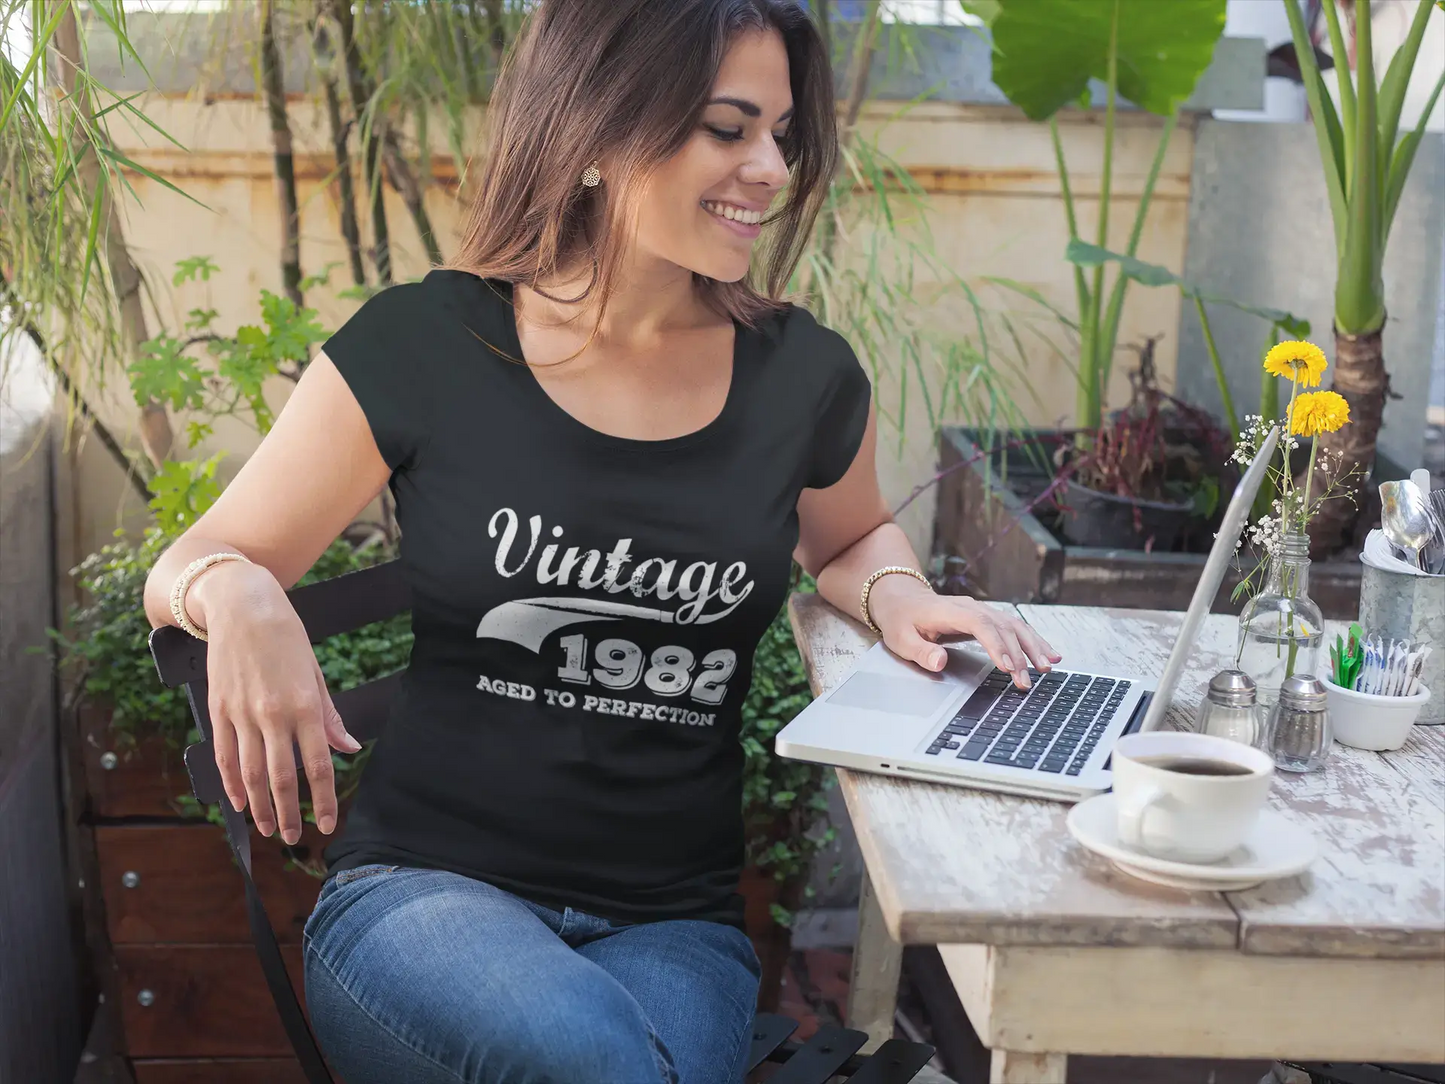 Vintage Aged to Perfection 1982, Black, Women's Short Sleeve Round Neck T-shirt, gift t-shirt 00345